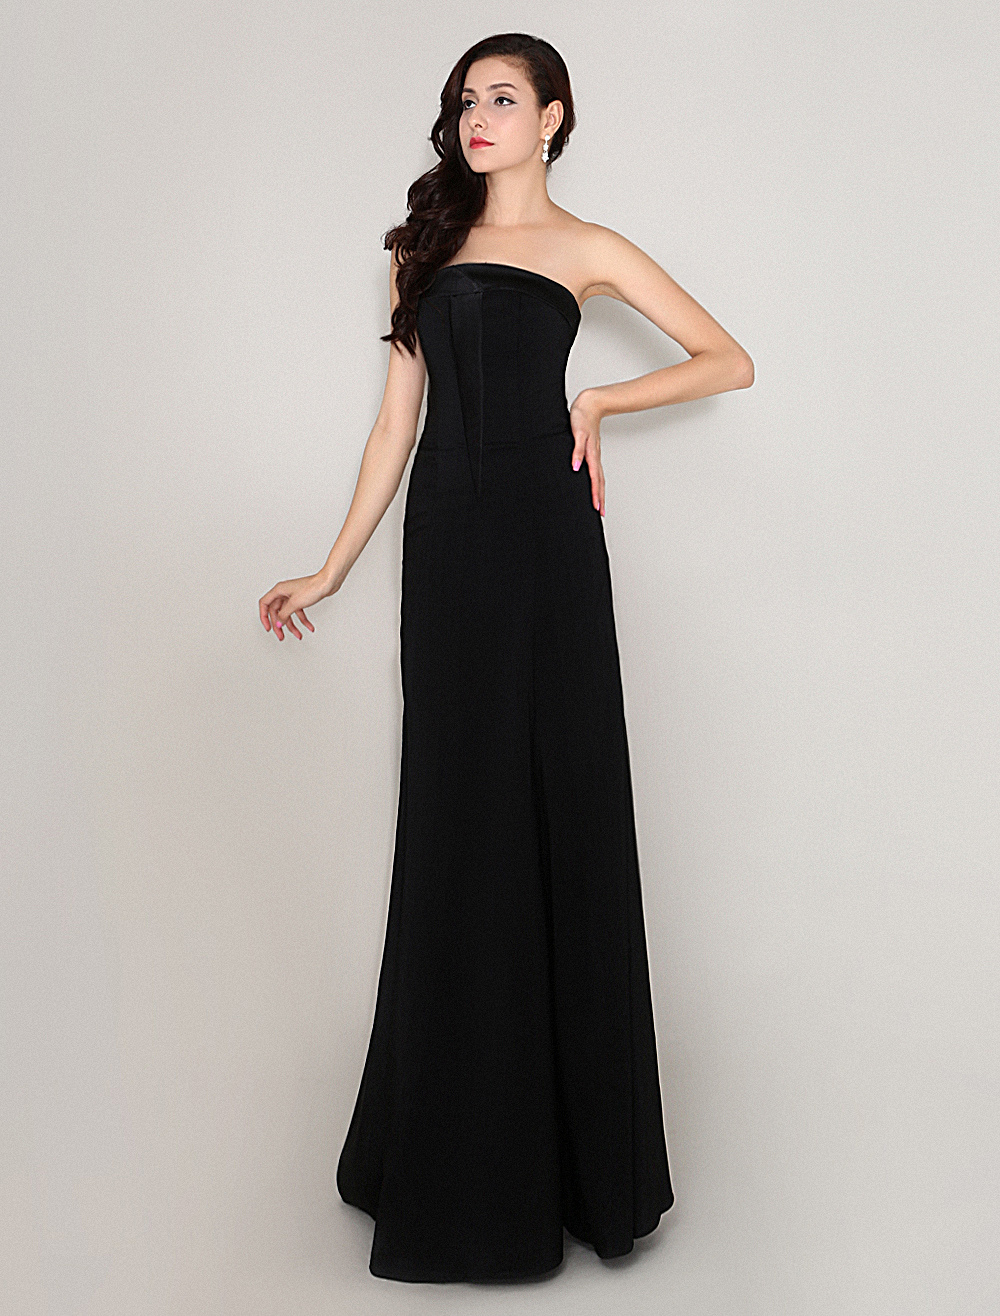 Elastic Woven Satin Draped Evening Dress With Strapless Floor-Length ...